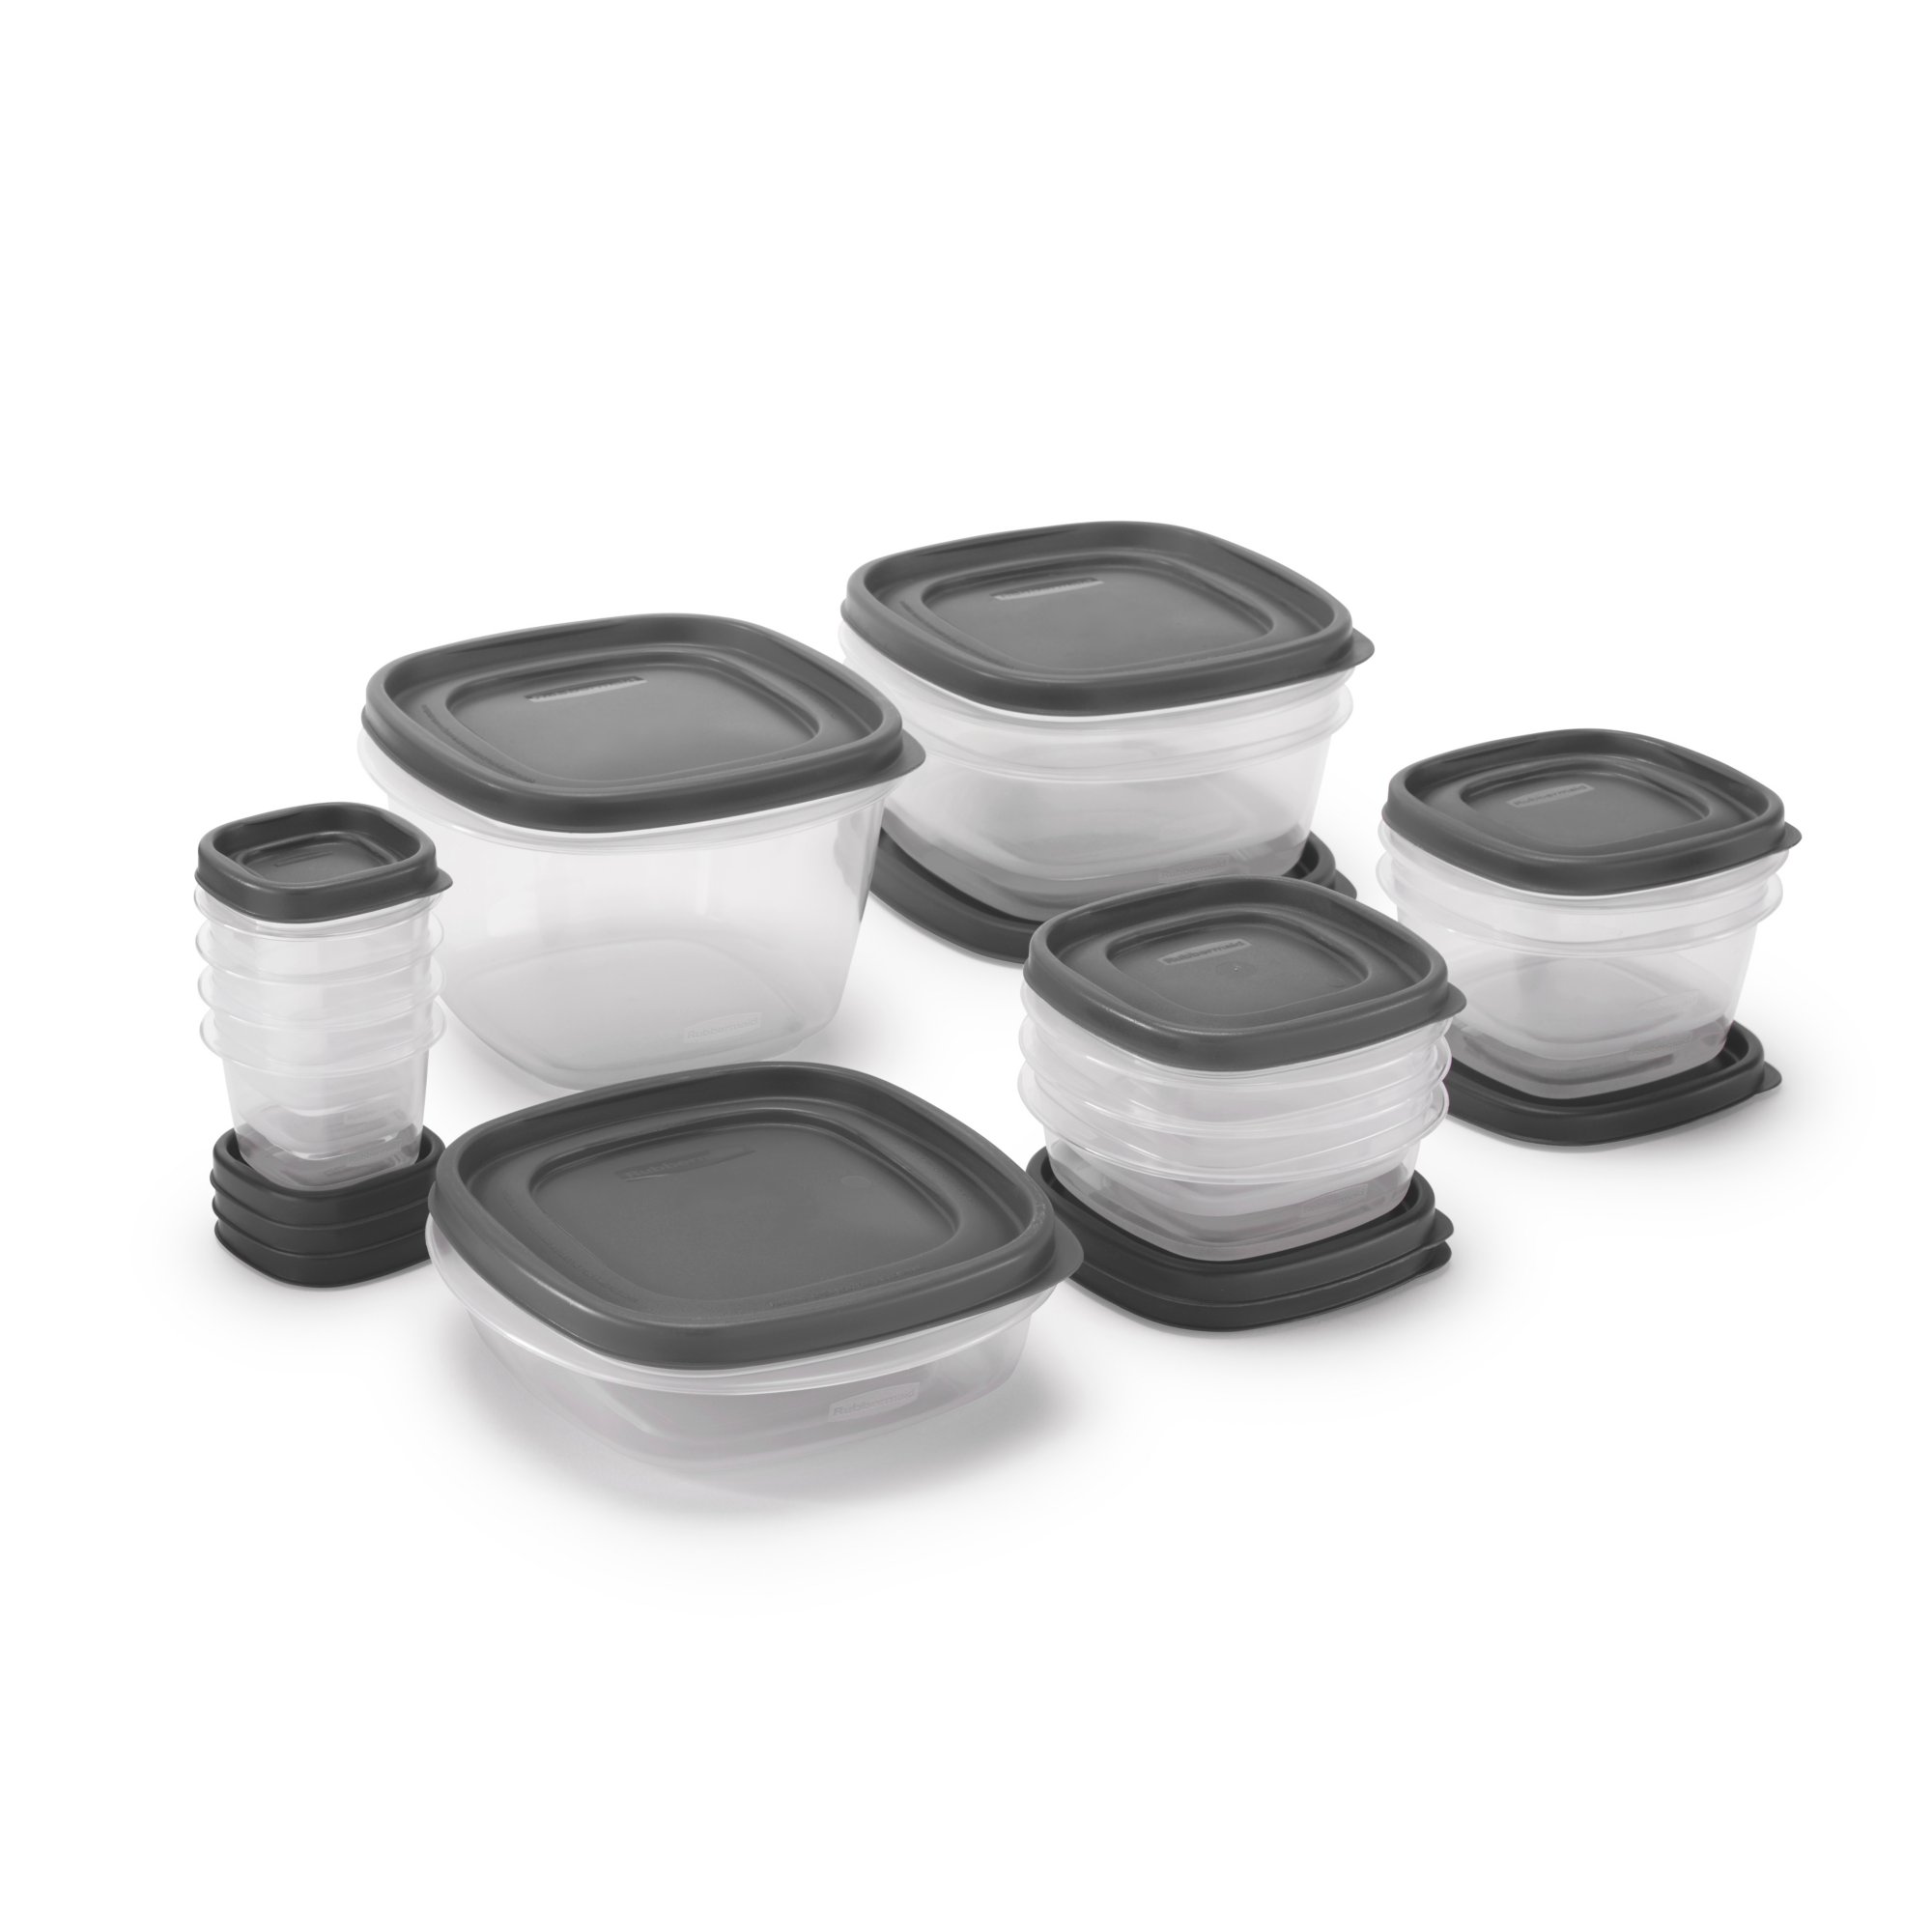  Rubbermaid 42-Piece Food Storage Containers with Lids